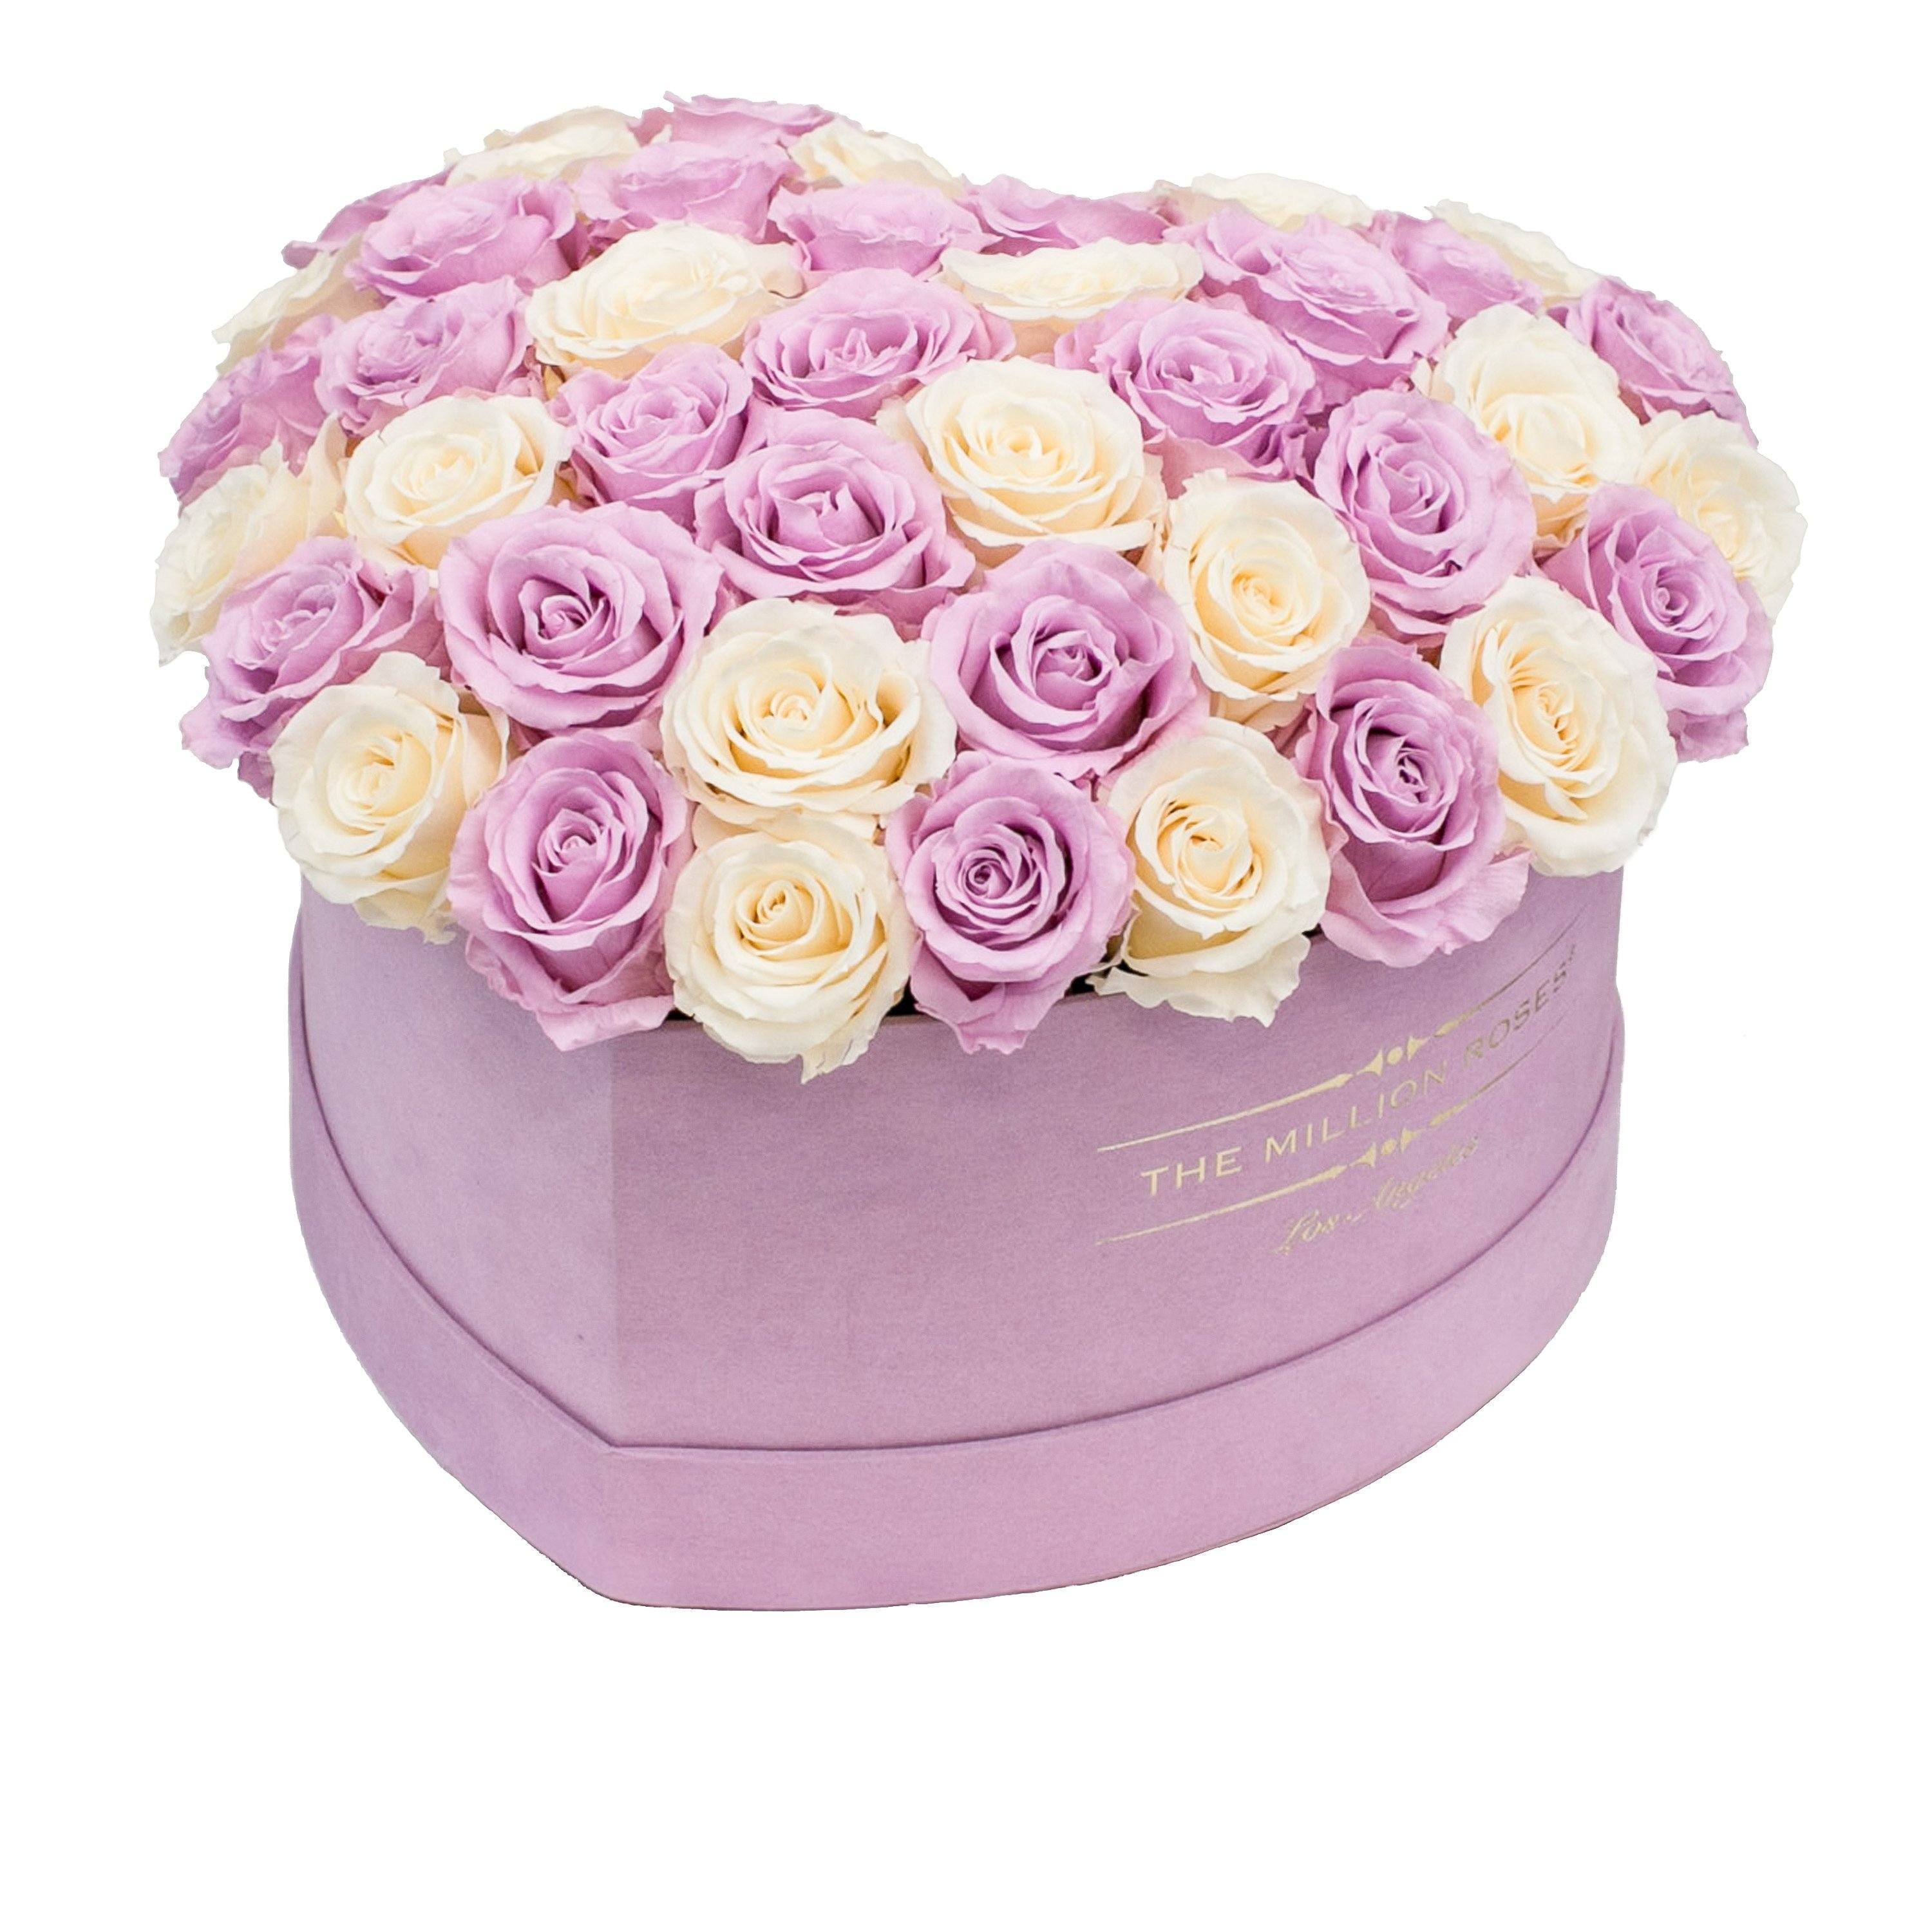 the million LOVE+ - glamour light-pink suede box - light-pink/ivory ETERNITY roses pink eternity roses - the million roses